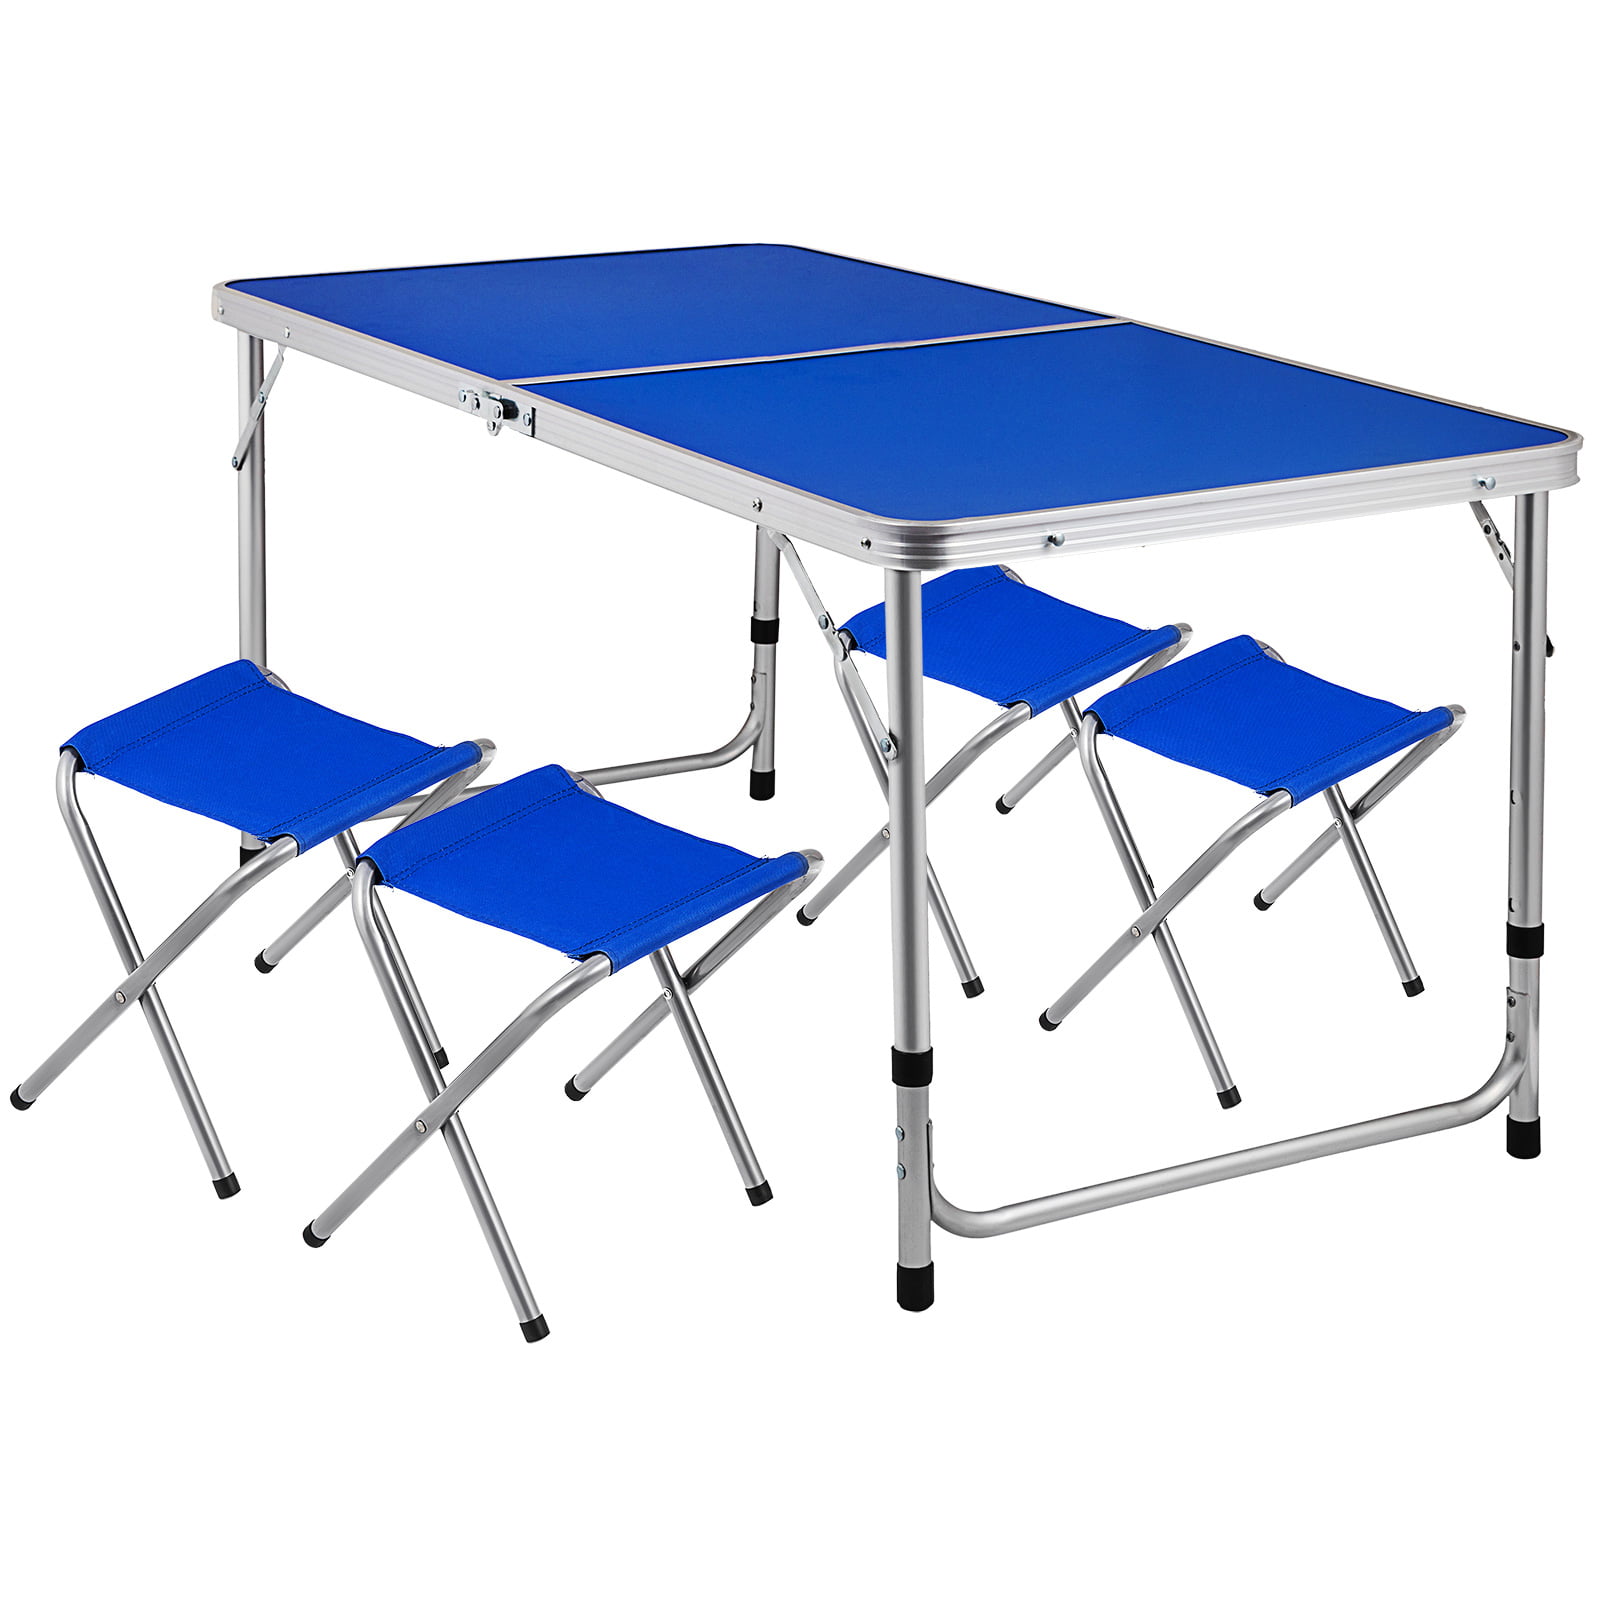 Details about   2 in 1 Folding Table Chair Portable Indoor Outdoor Picnic Party Dining Camp Tool 